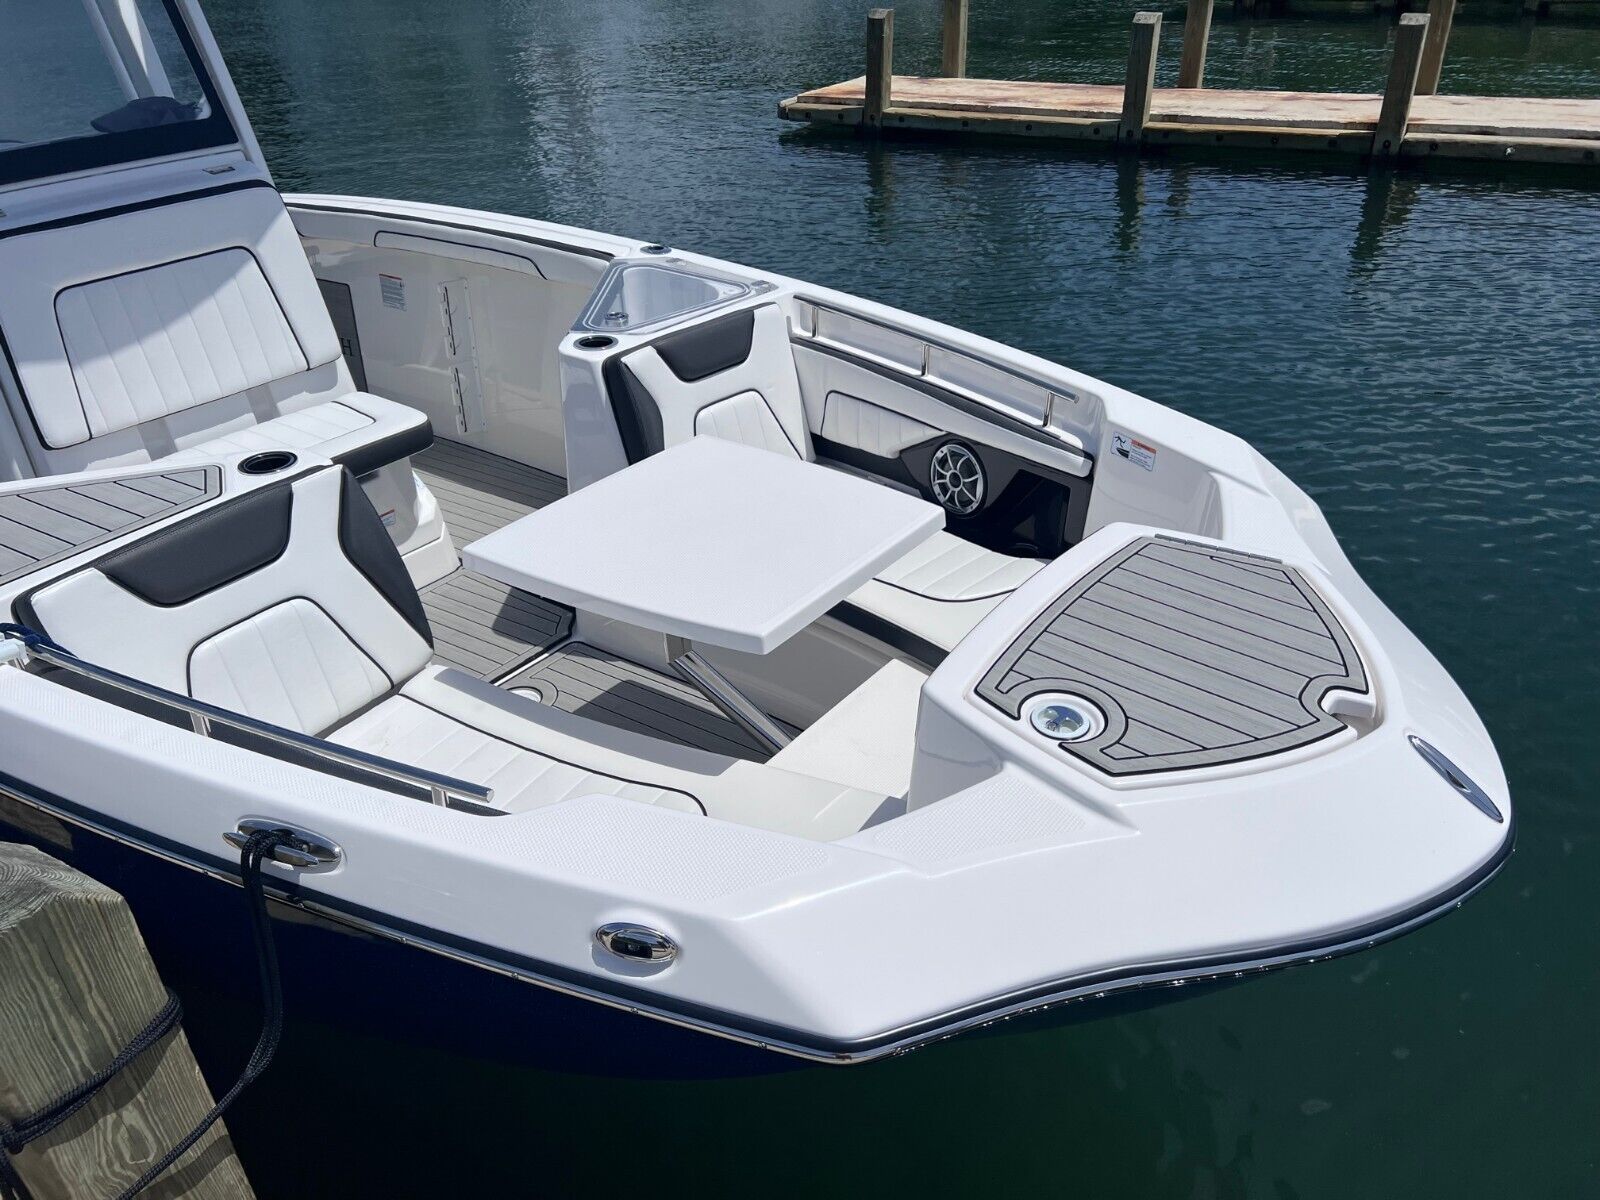 YAMAHA 255 FSH SPORT E CENTER CONSOLE BOAT 2022 for sale for 110,000